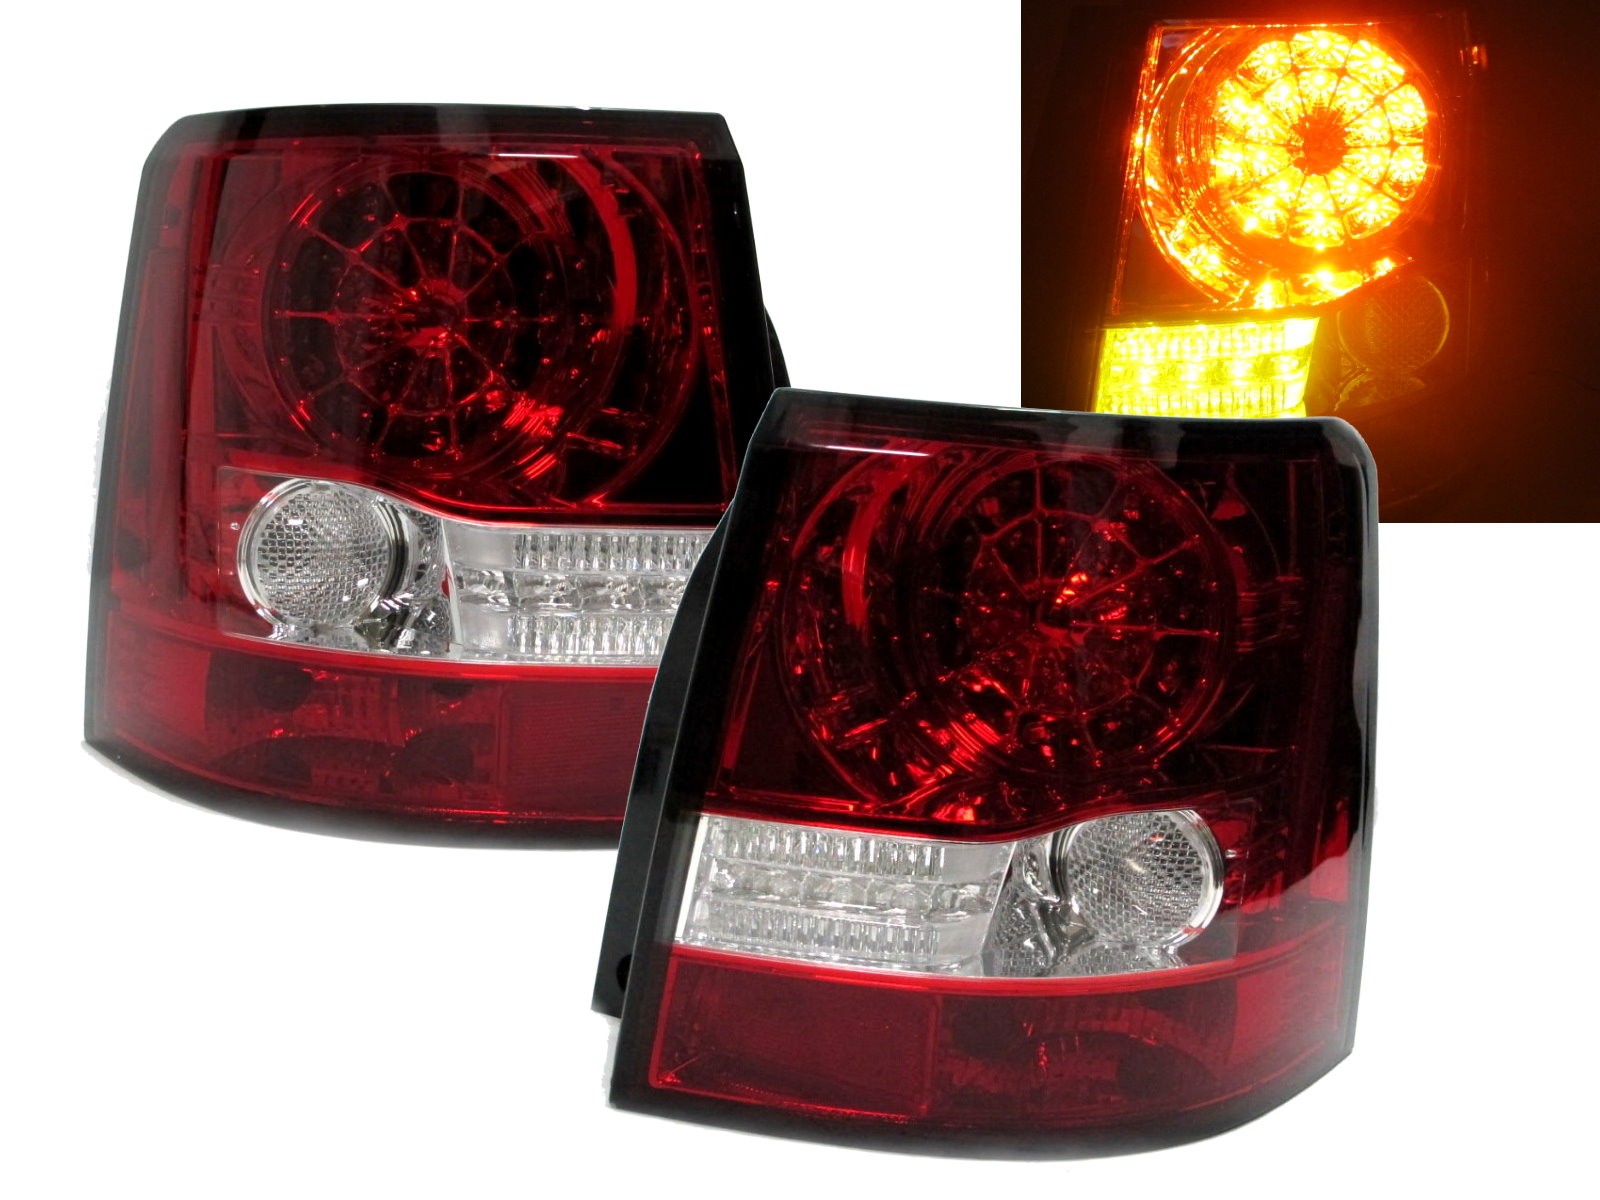 CrazyTheGod Range Rover Sport 2006-2009 L320 LED Tail Rear Light Red/Clear for Land Rover